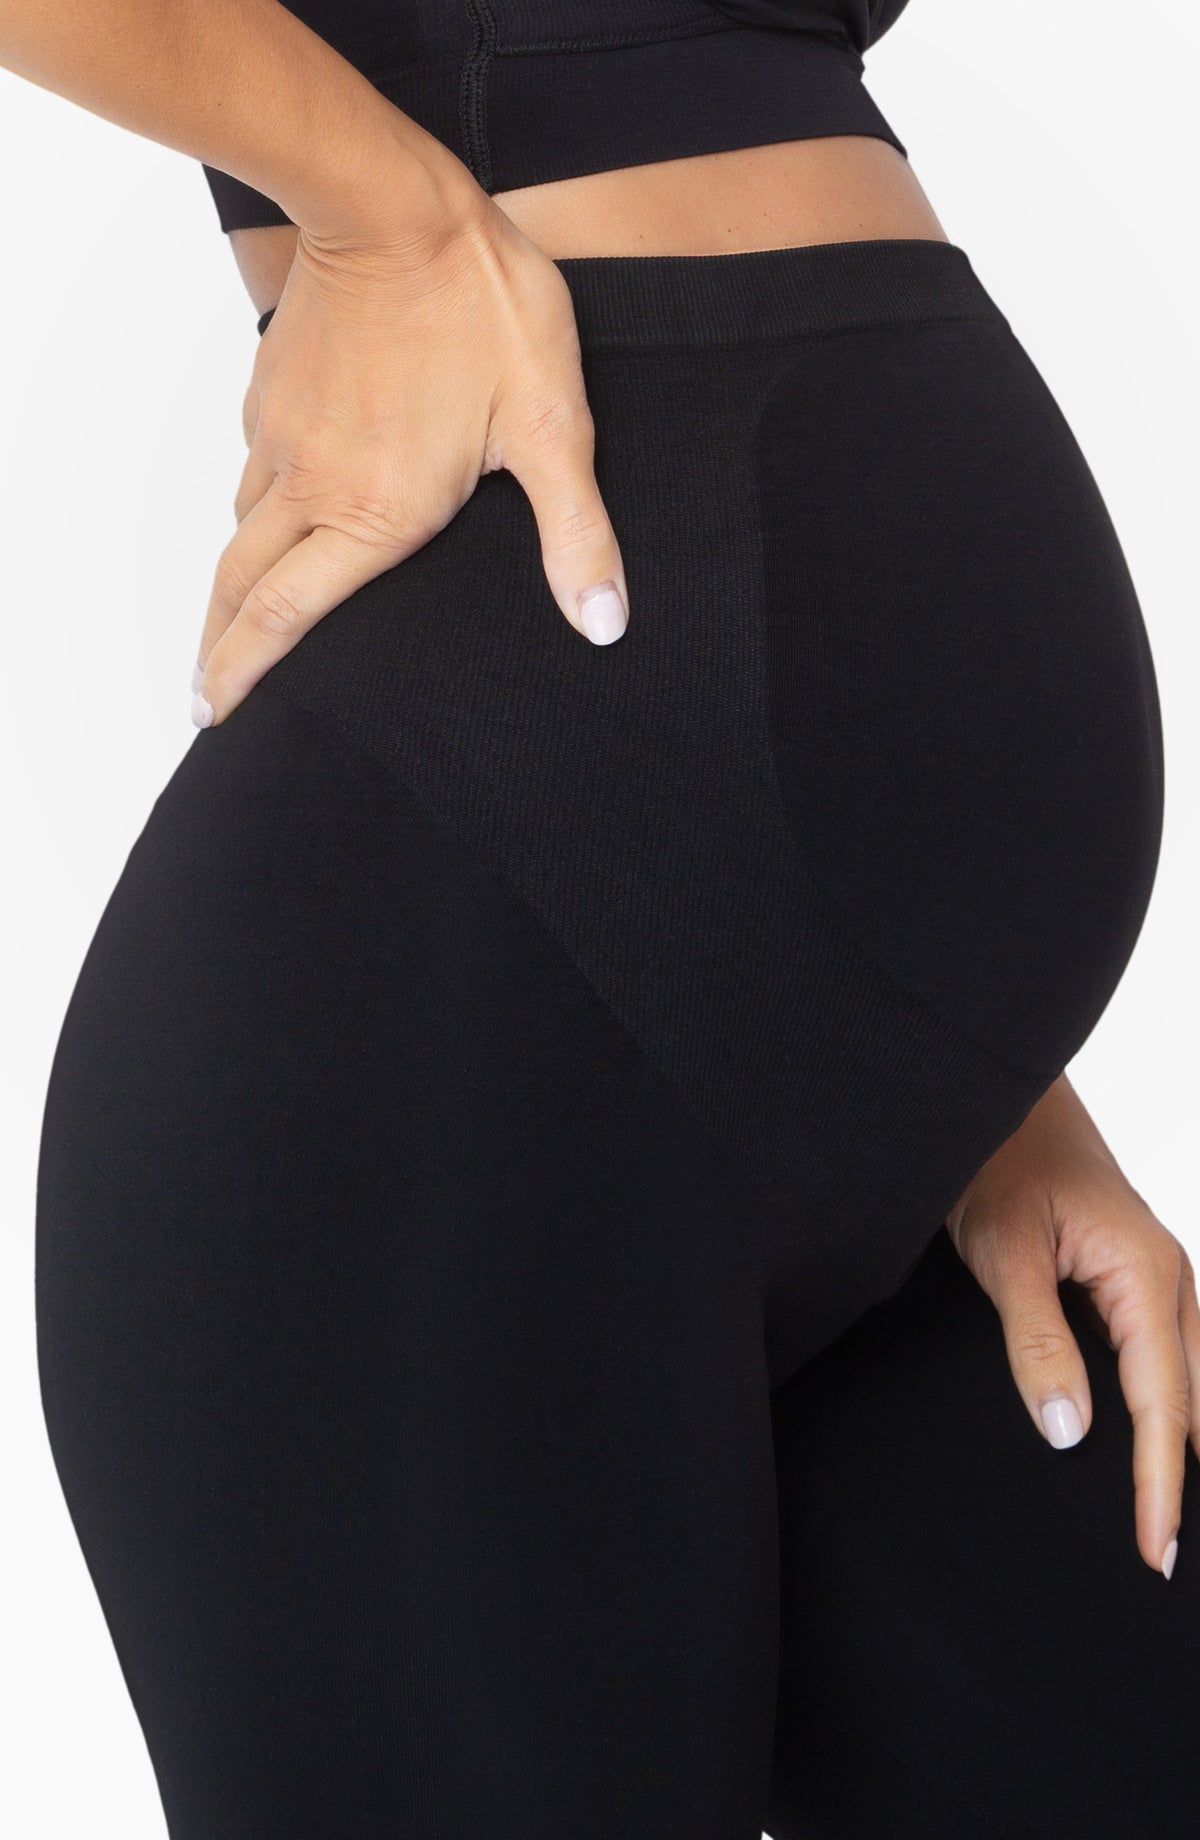 Maternity Bump Support™ Leggings: Belly Support For Pregnancy